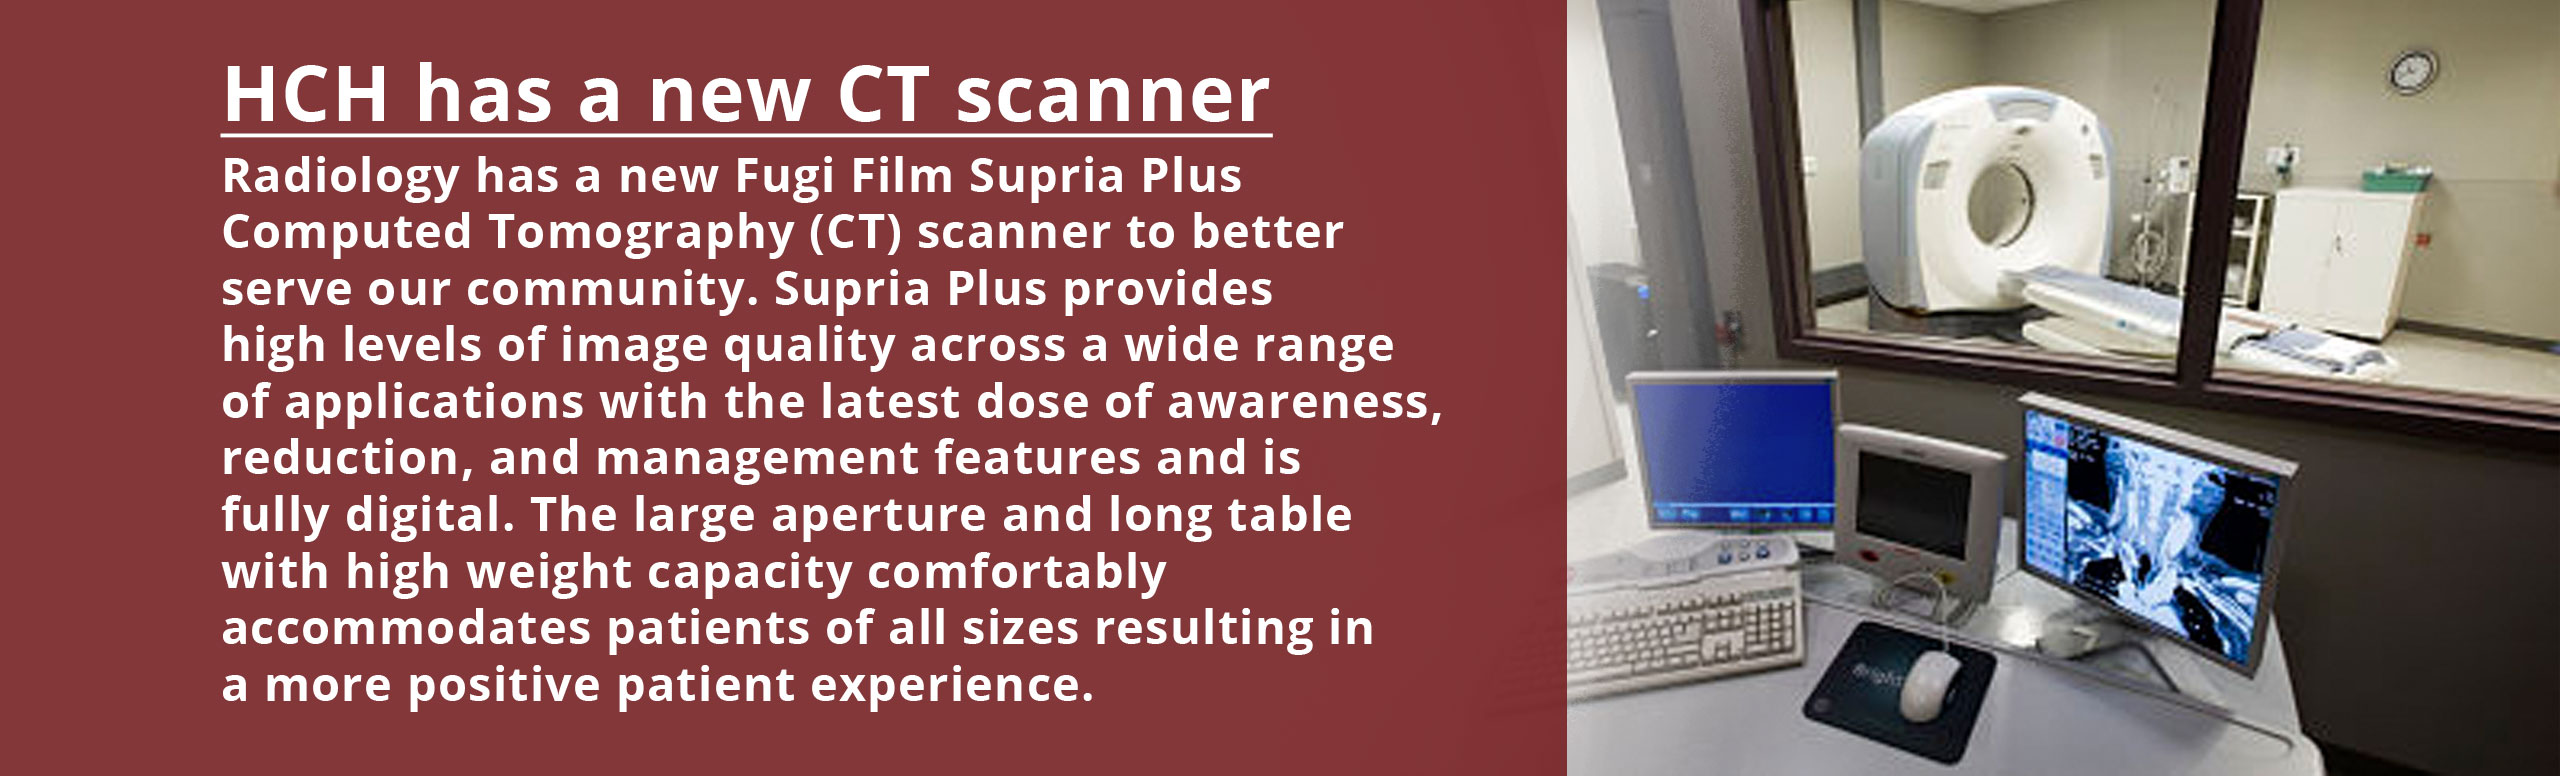 Banner picture of a room with widows that looks into an MRI Scanning Room. There is a table with three screens up and one of the screens is of an X-Ray. Banner says:


HCH has a new CT Scanner
Radiology has a new Fungi Film Supria Plus Computed Tomography (CT) scanner to better serve our community. Supria Plus provides high levels  of image quality across a wide range of applications with the latest dose of awareness, reduction, and management feautie==es  features and is fully digital. The large aperture and long table with high weight capacity comfortably accommodates patients of all sizes resulting in a more positive patient experience.